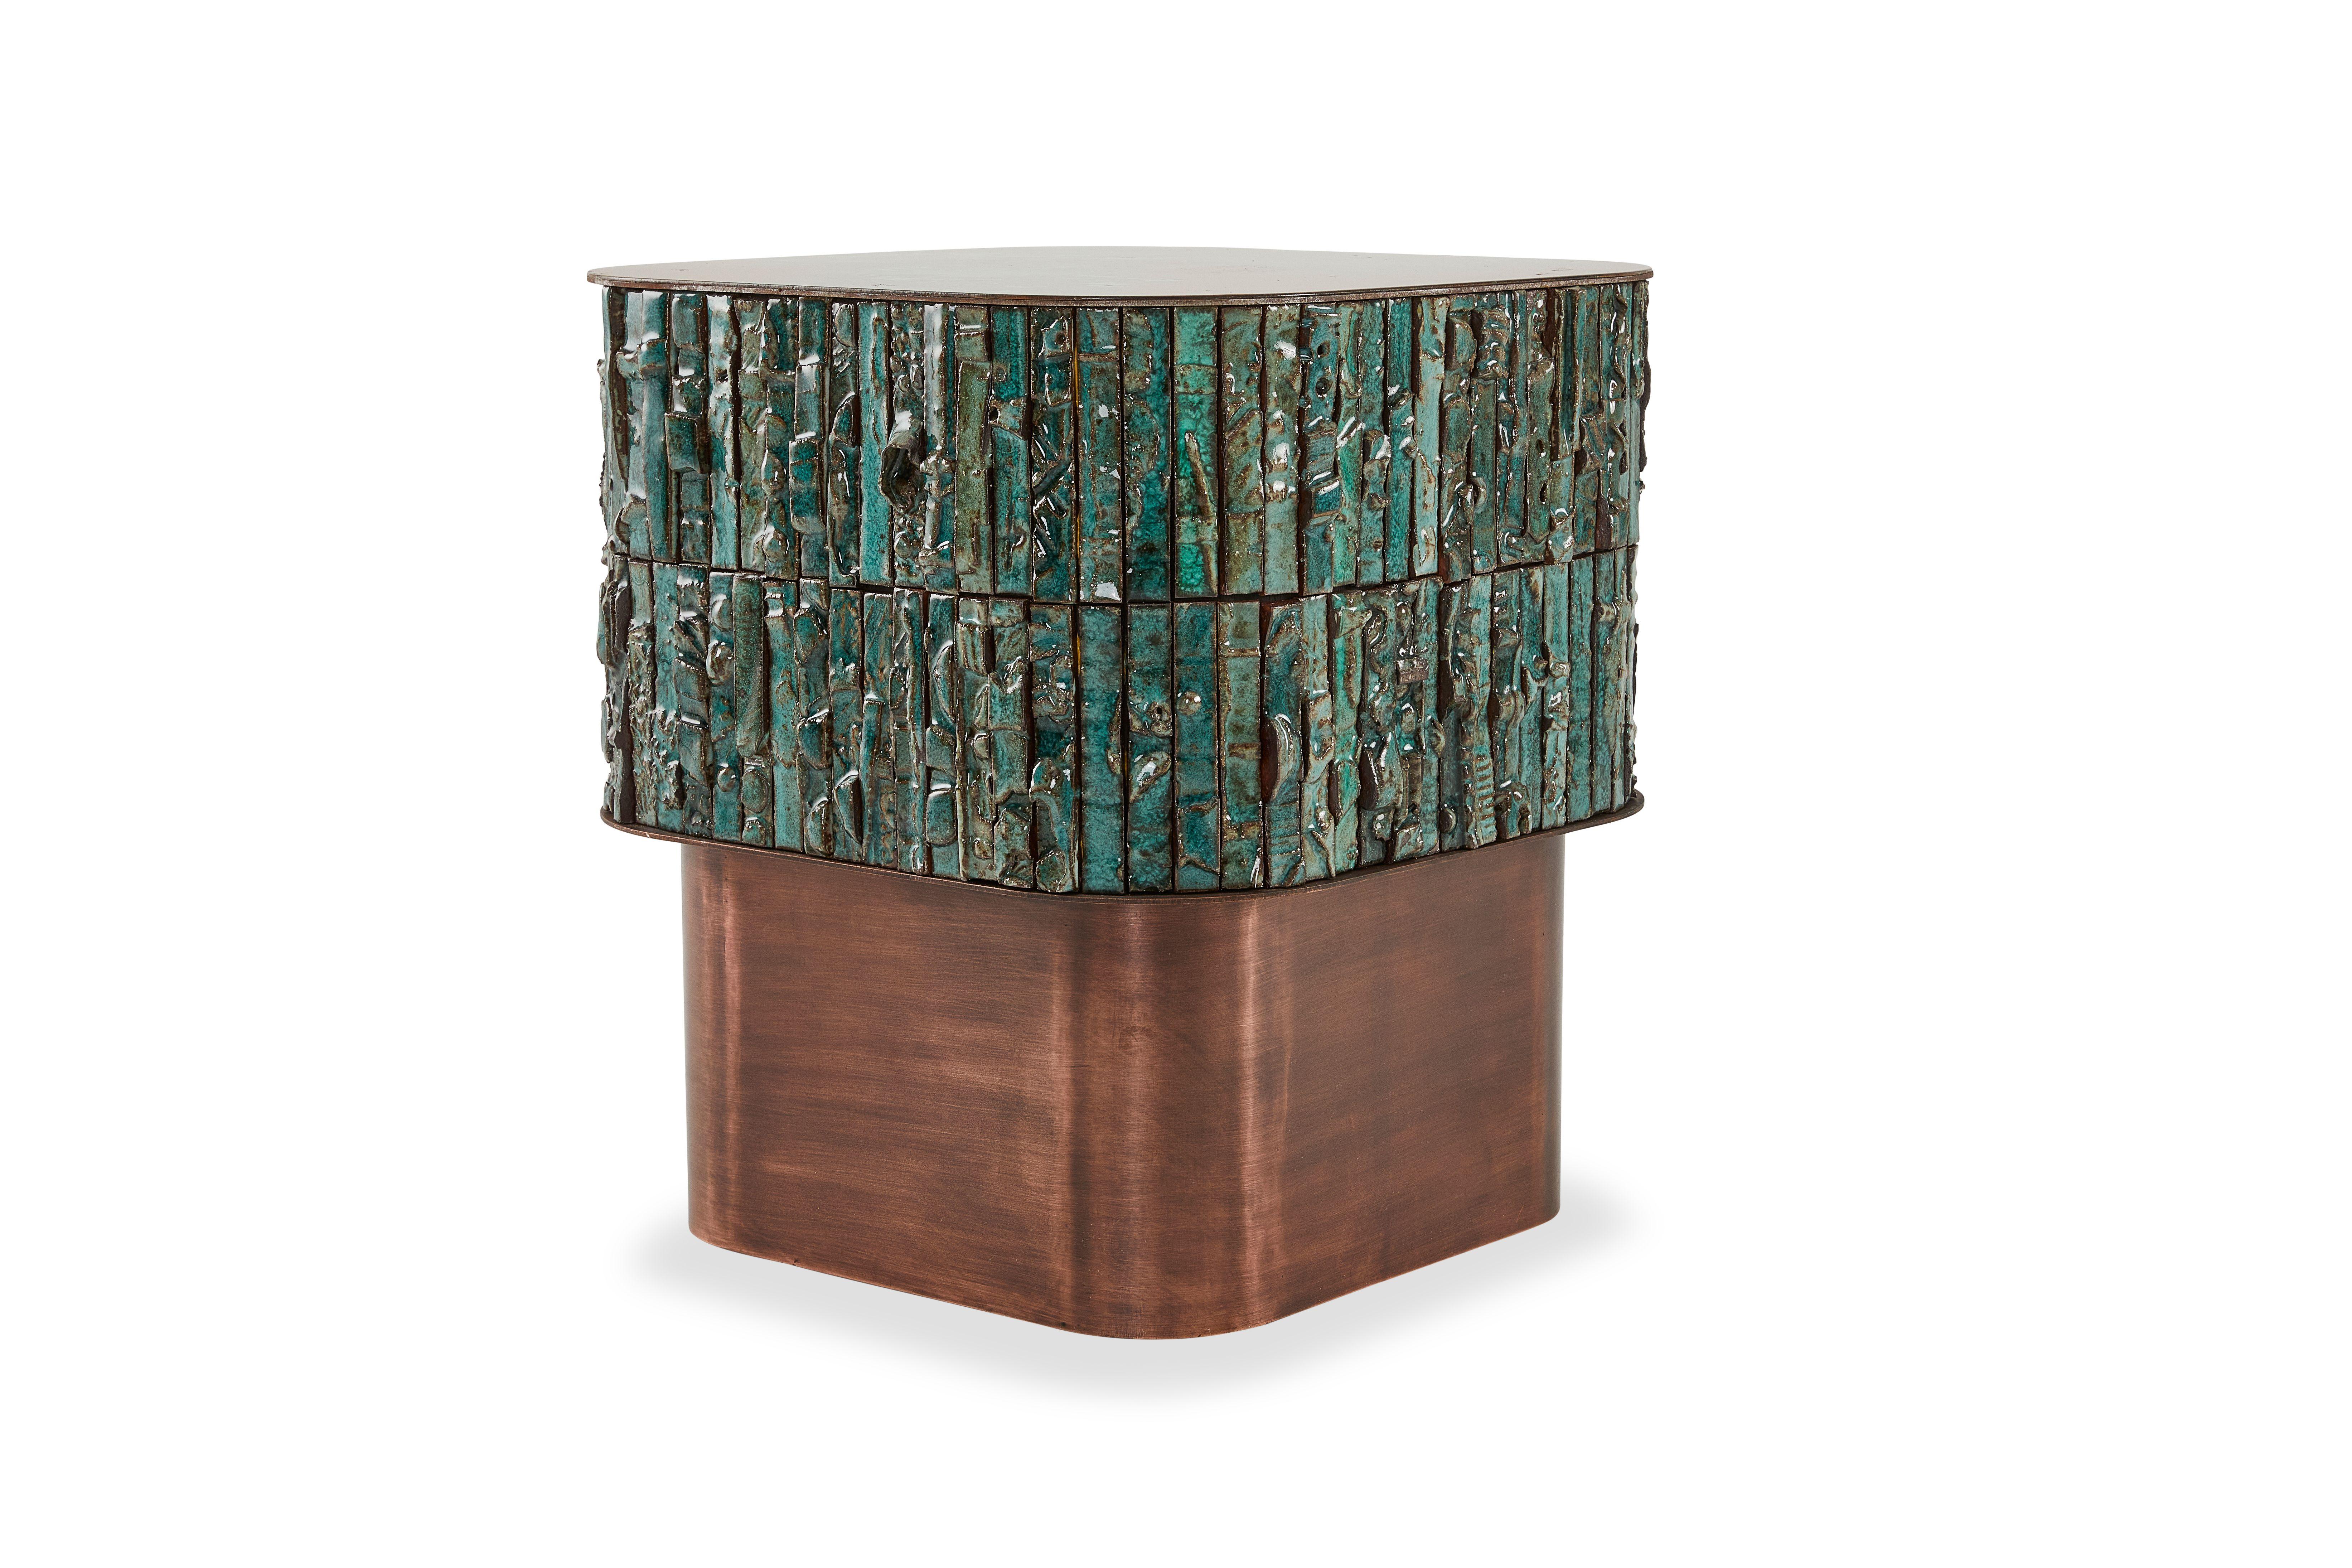 Boogie Nights Side Table by Egg Designs
Dimensions: 51 L X 51 D X 56 H cm 
Materials: Antique Copper Coated, Solid Copper, Verdigris, Handmade Ceramic Tiles

Founded by South Africans and life partners, Greg and Roche Dry - Egg is a unique